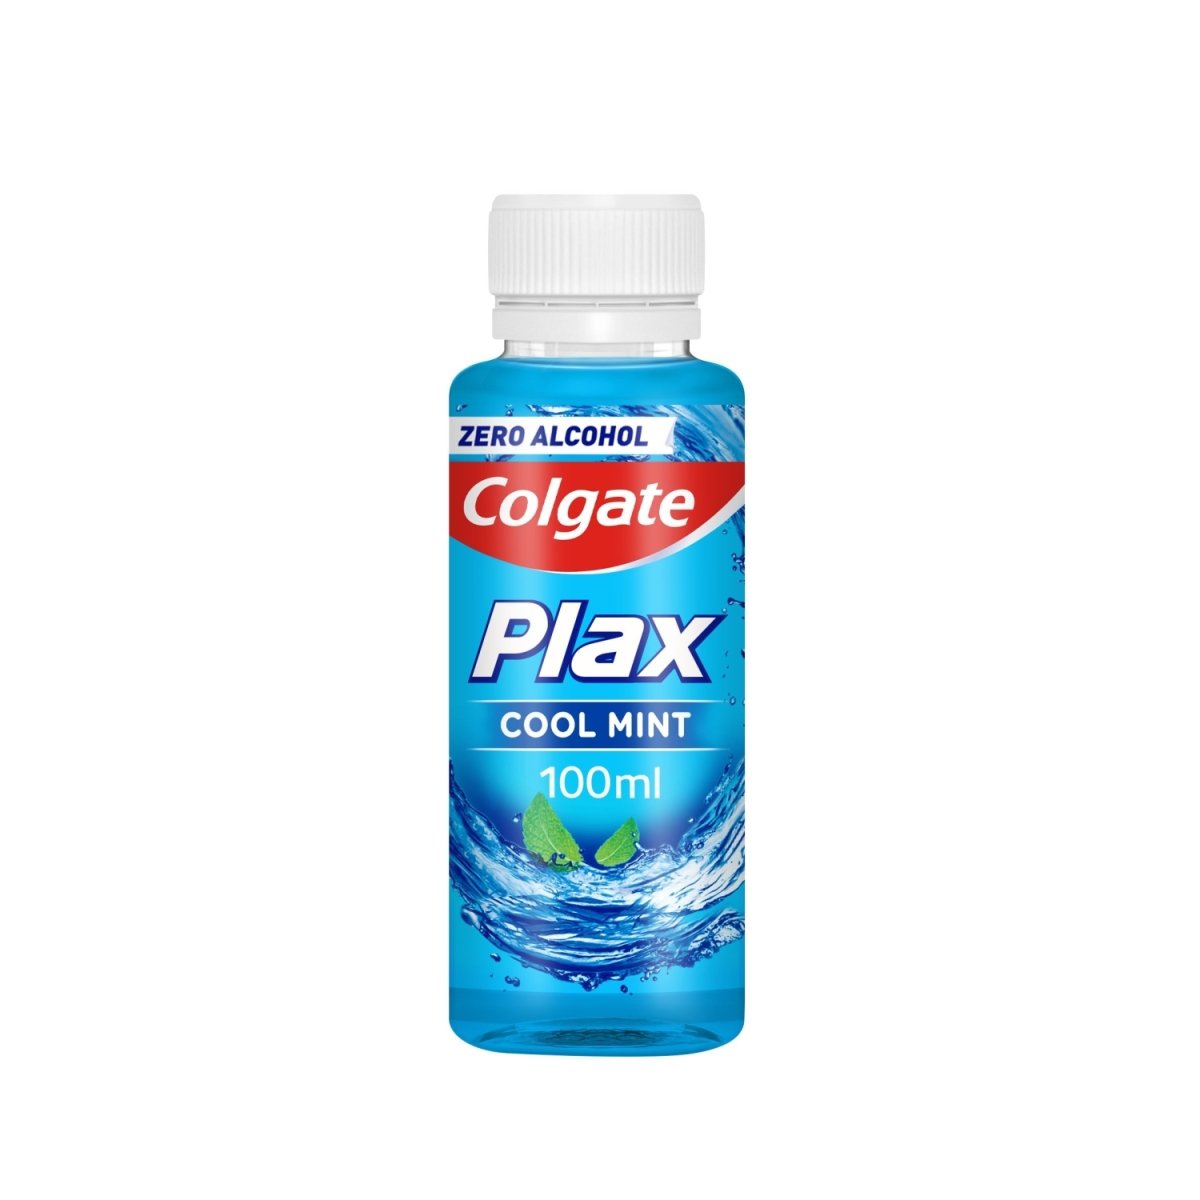 Colgate Mouth Rinse Plax Cool Mint Travel - Intamarque 8718951193796